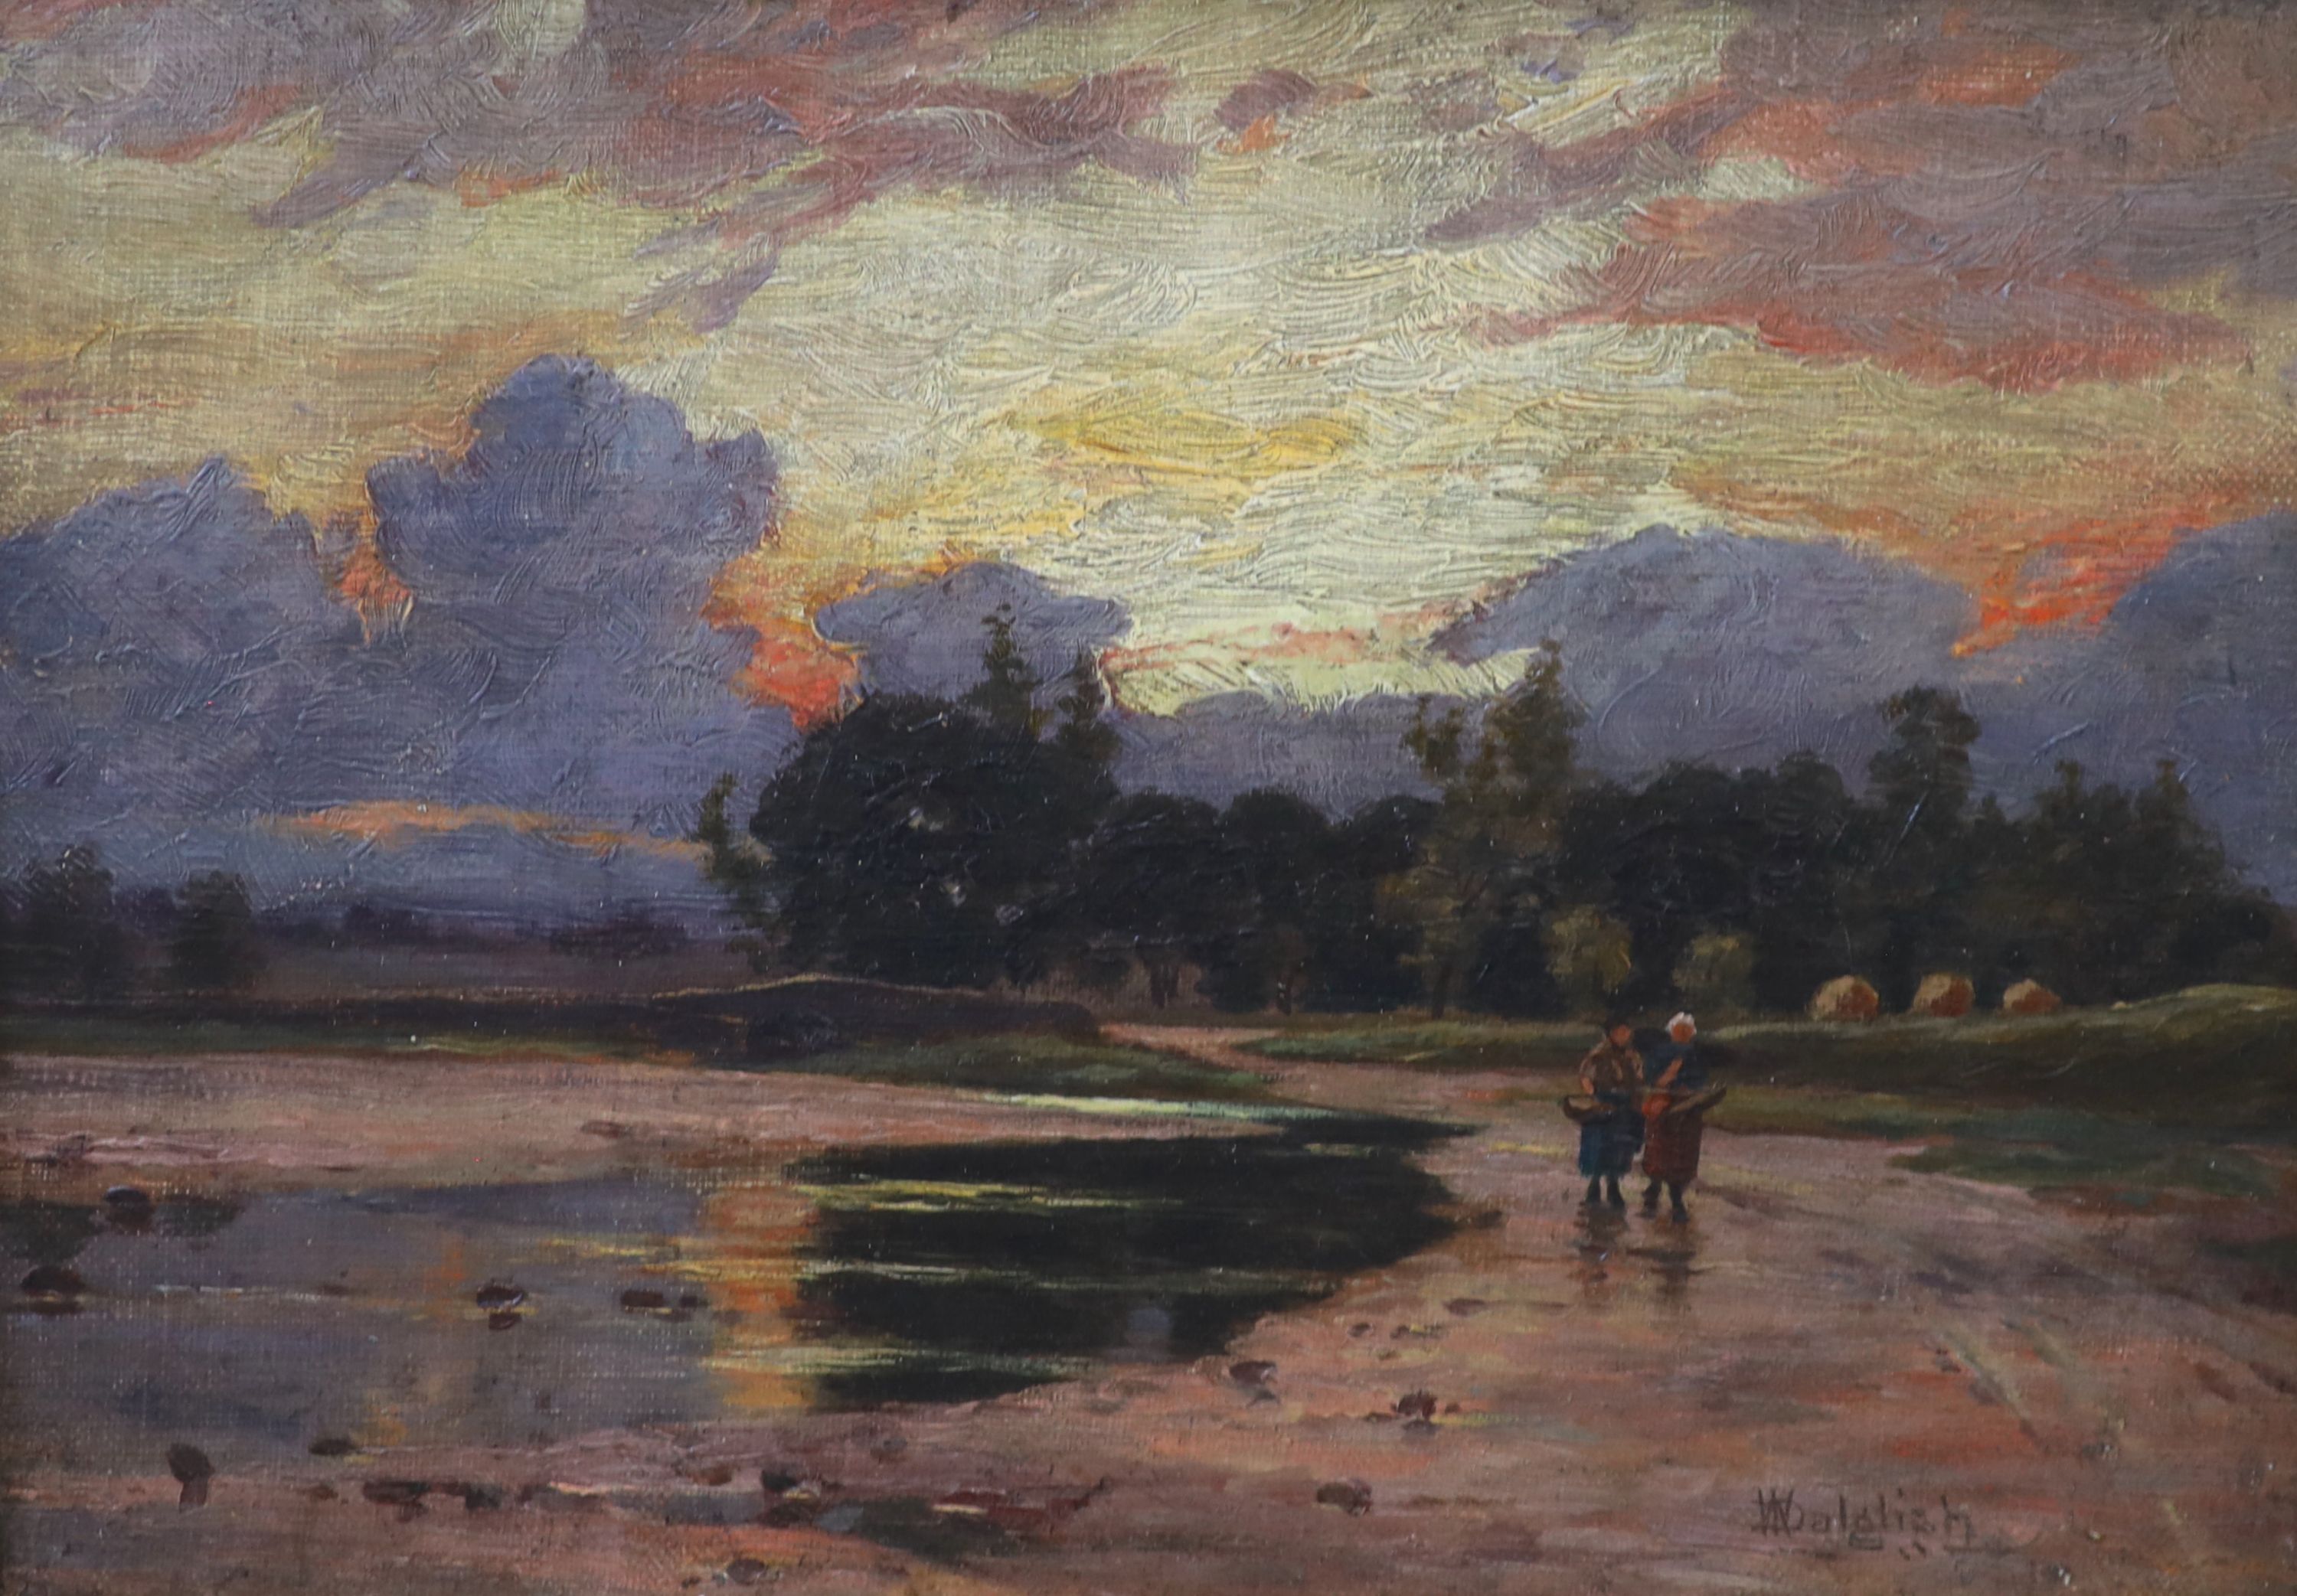 William Dalgleish (1860-1909), Figures in a landscape at sunset, Oil on canvas, 19 x 27cm.